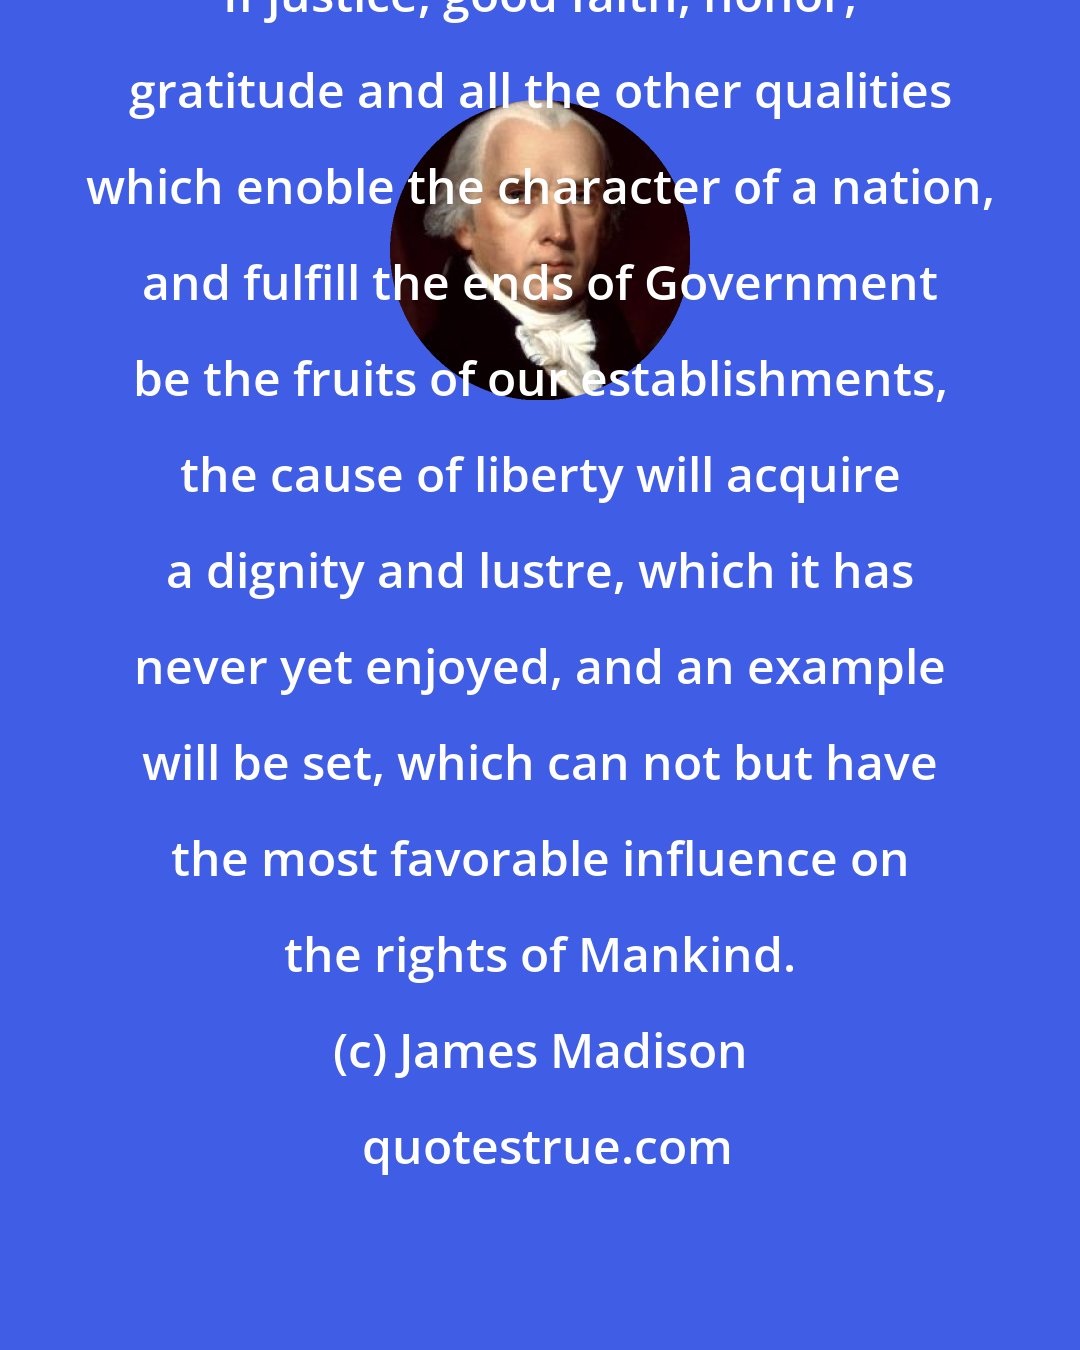 James Madison: If justice, good faith, honor, gratitude and all the other qualities which enoble the character of a nation, and fulfill the ends of Government be the fruits of our establishments, the cause of liberty will acquire a dignity and lustre, which it has never yet enjoyed, and an example will be set, which can not but have the most favorable influence on the rights of Mankind.